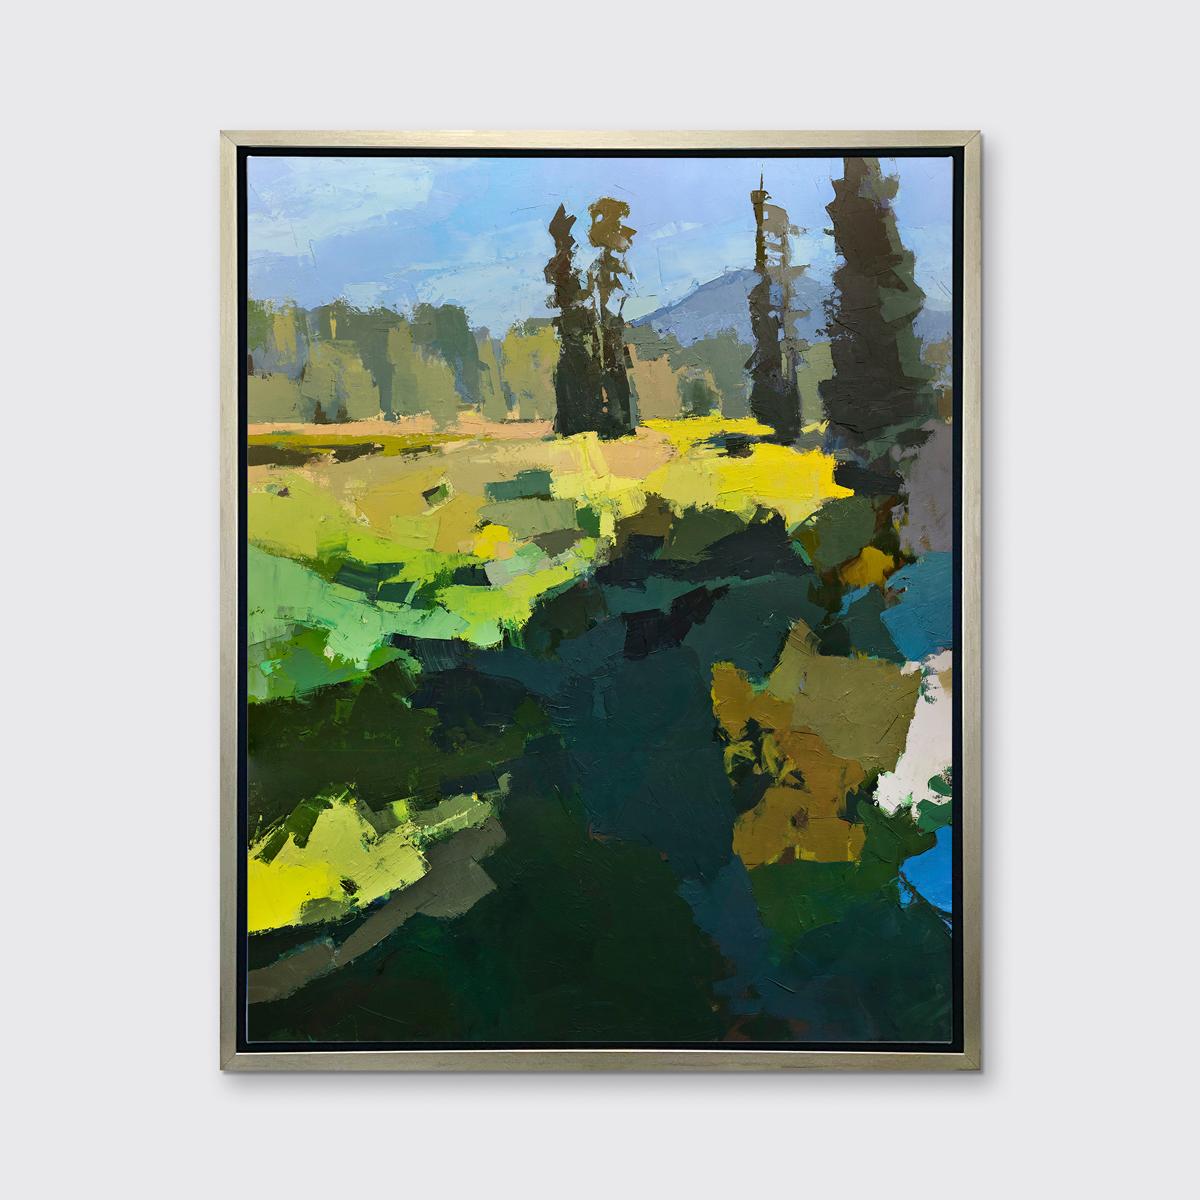 This Limited Edition giclee landscape print by Bri Custer is an edition size of 195. It features a blue and green palette with vibrant yellow accents, and captures an abstracted landscape with large trees in the distance. Printed on canvas, this